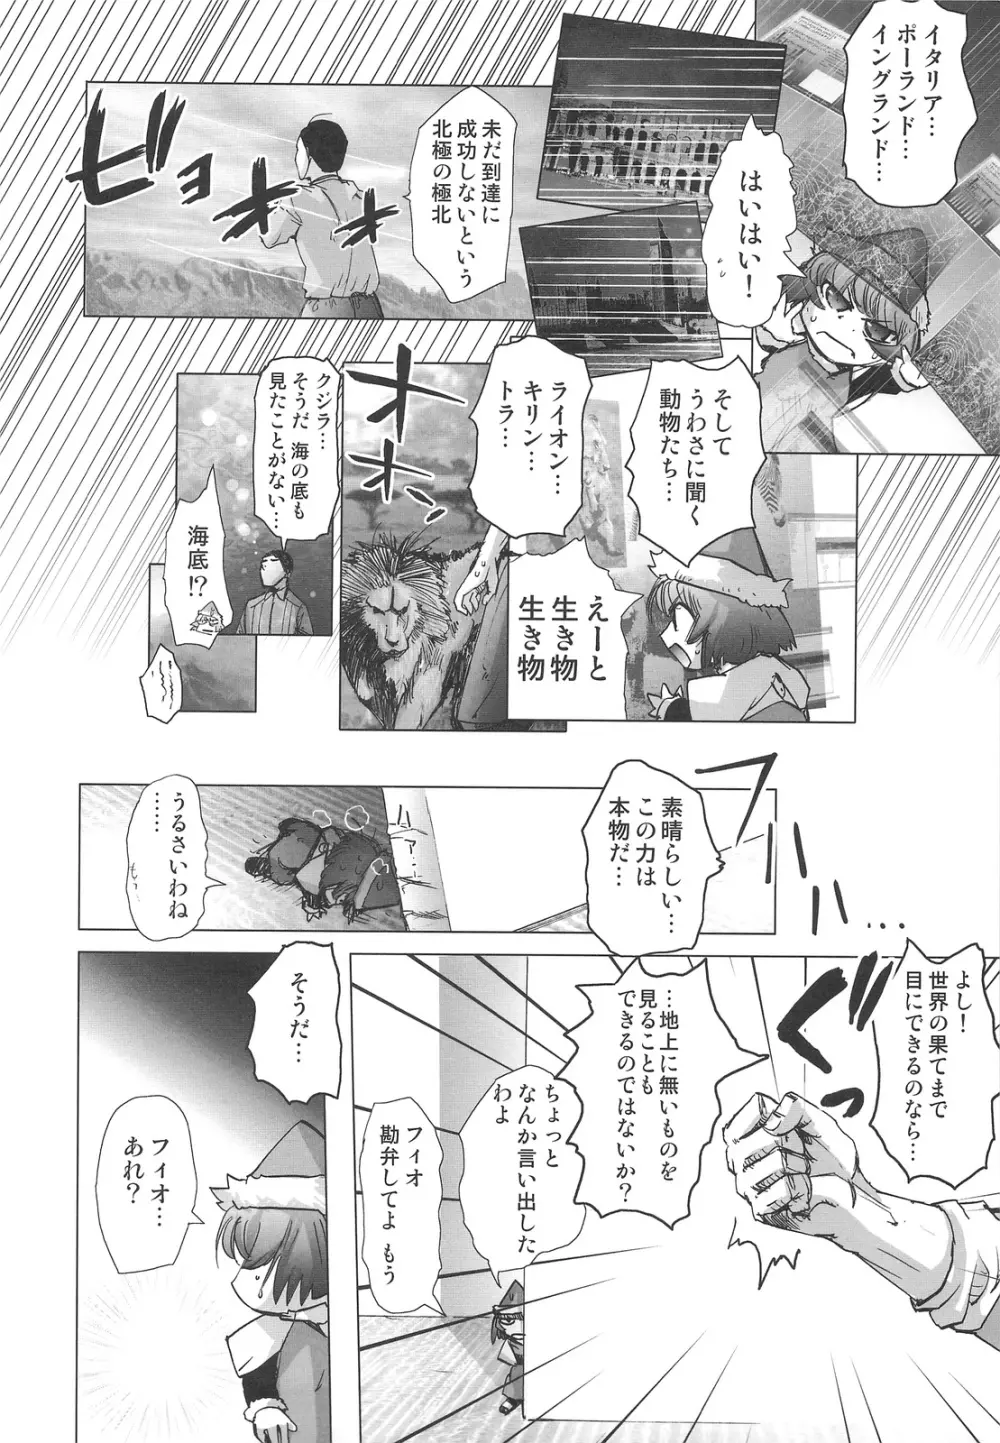 DEADLY リク通 Vol. 2 Page.13